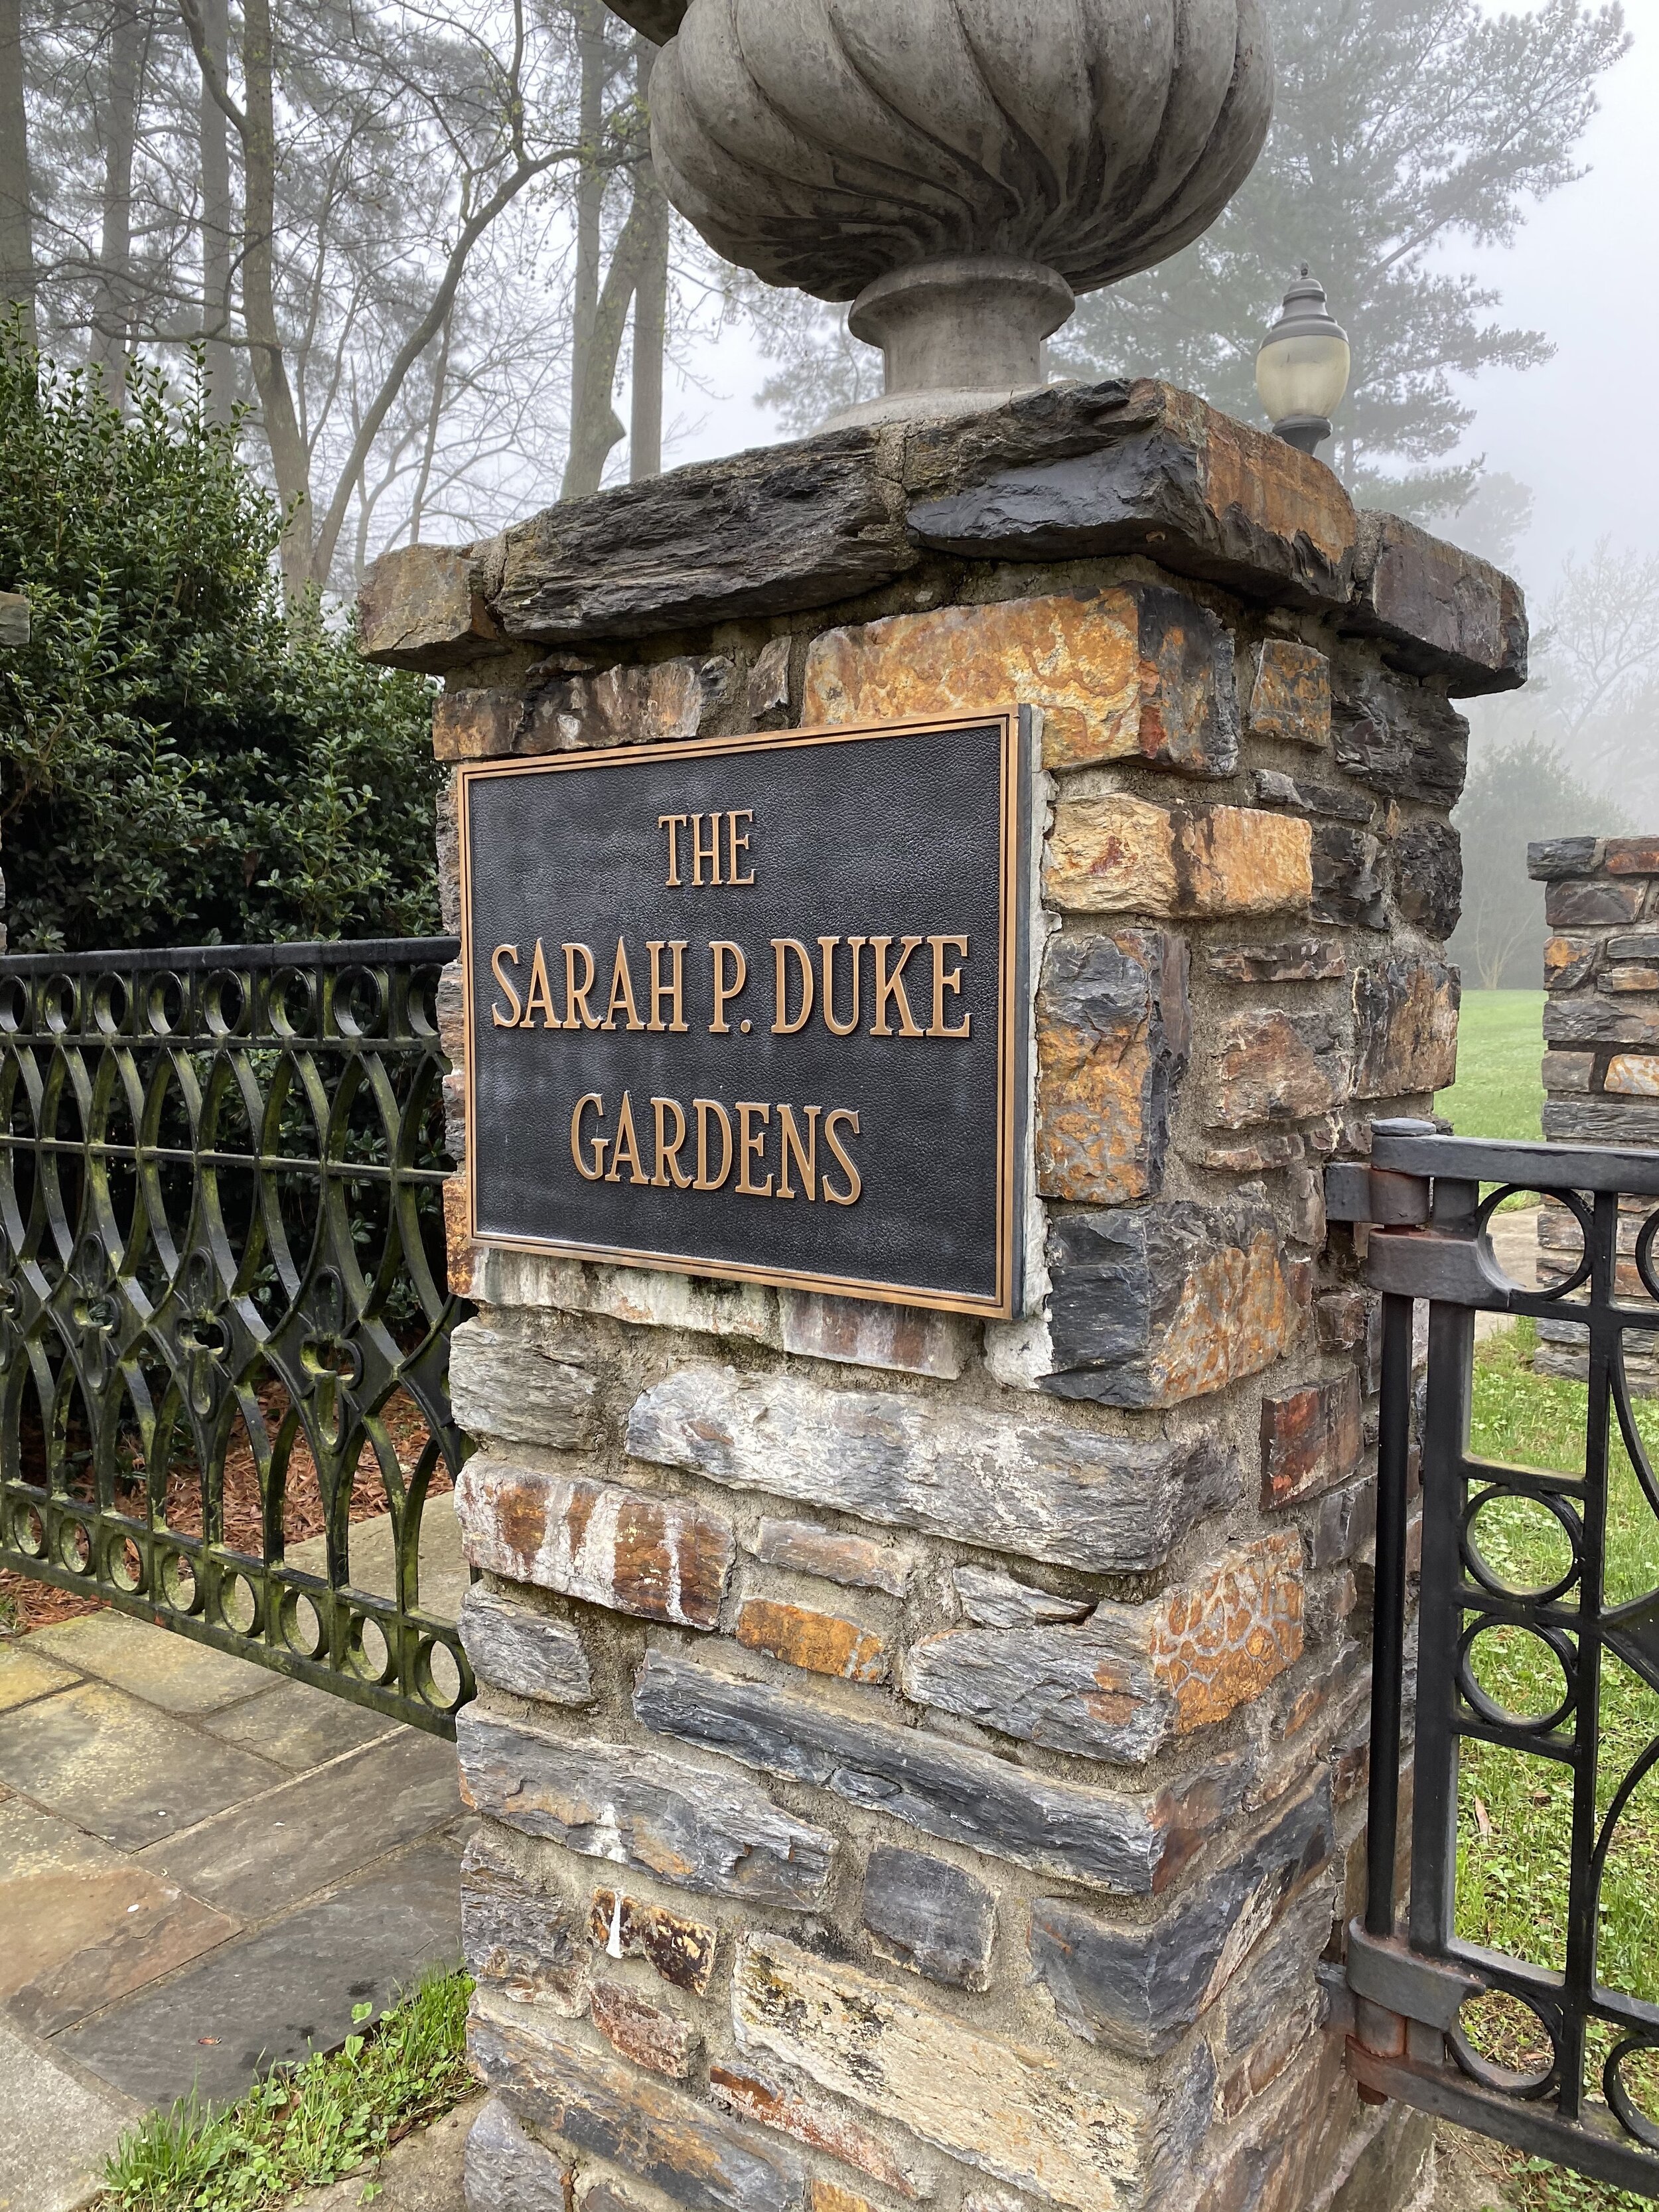 Sarah P Duke Gardens is closed until further notice.